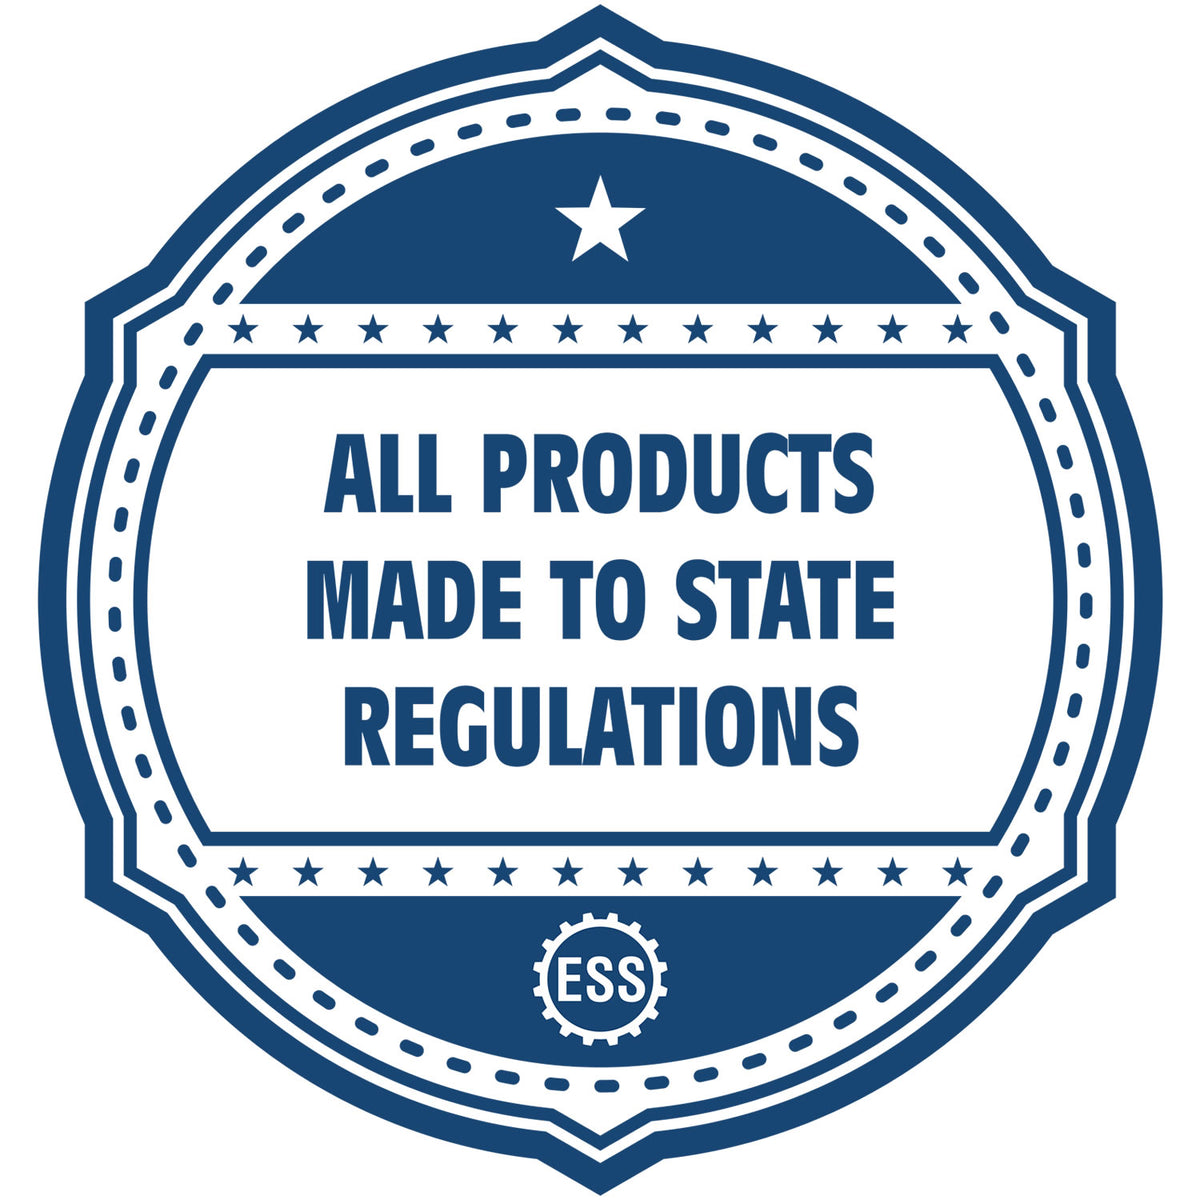 An icon or badge element for the Heavy Duty Cast Iron Oklahoma Engineer Seal Embosser showing that this product is made in compliance with state regulations.